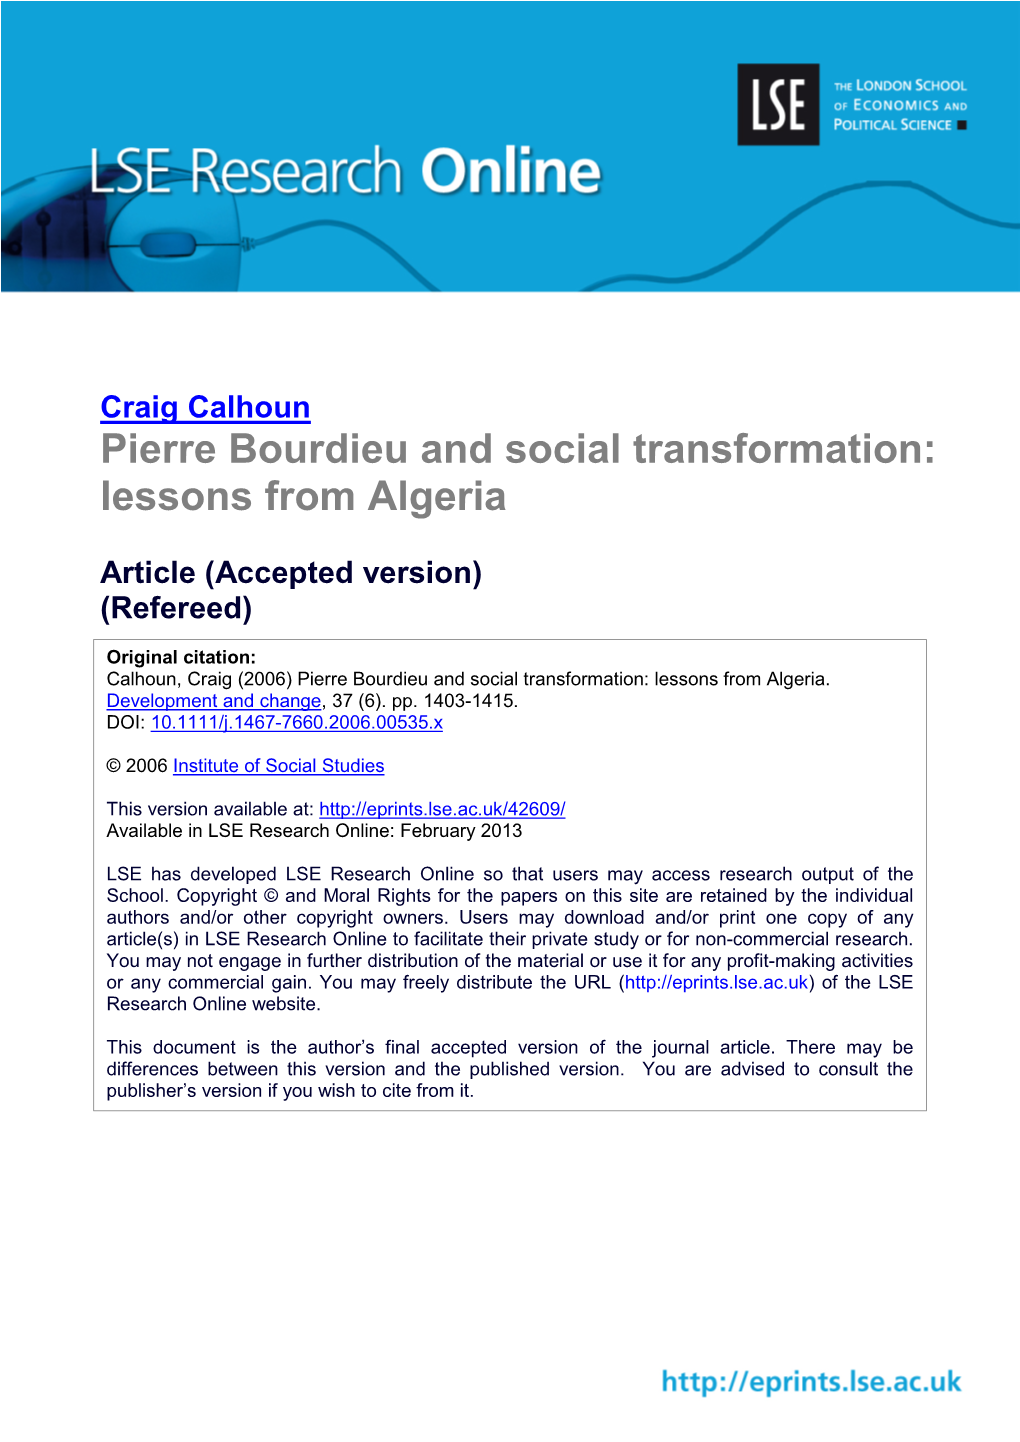 Pierre Bourdieu and Social Transformation: Lessons from Algeria